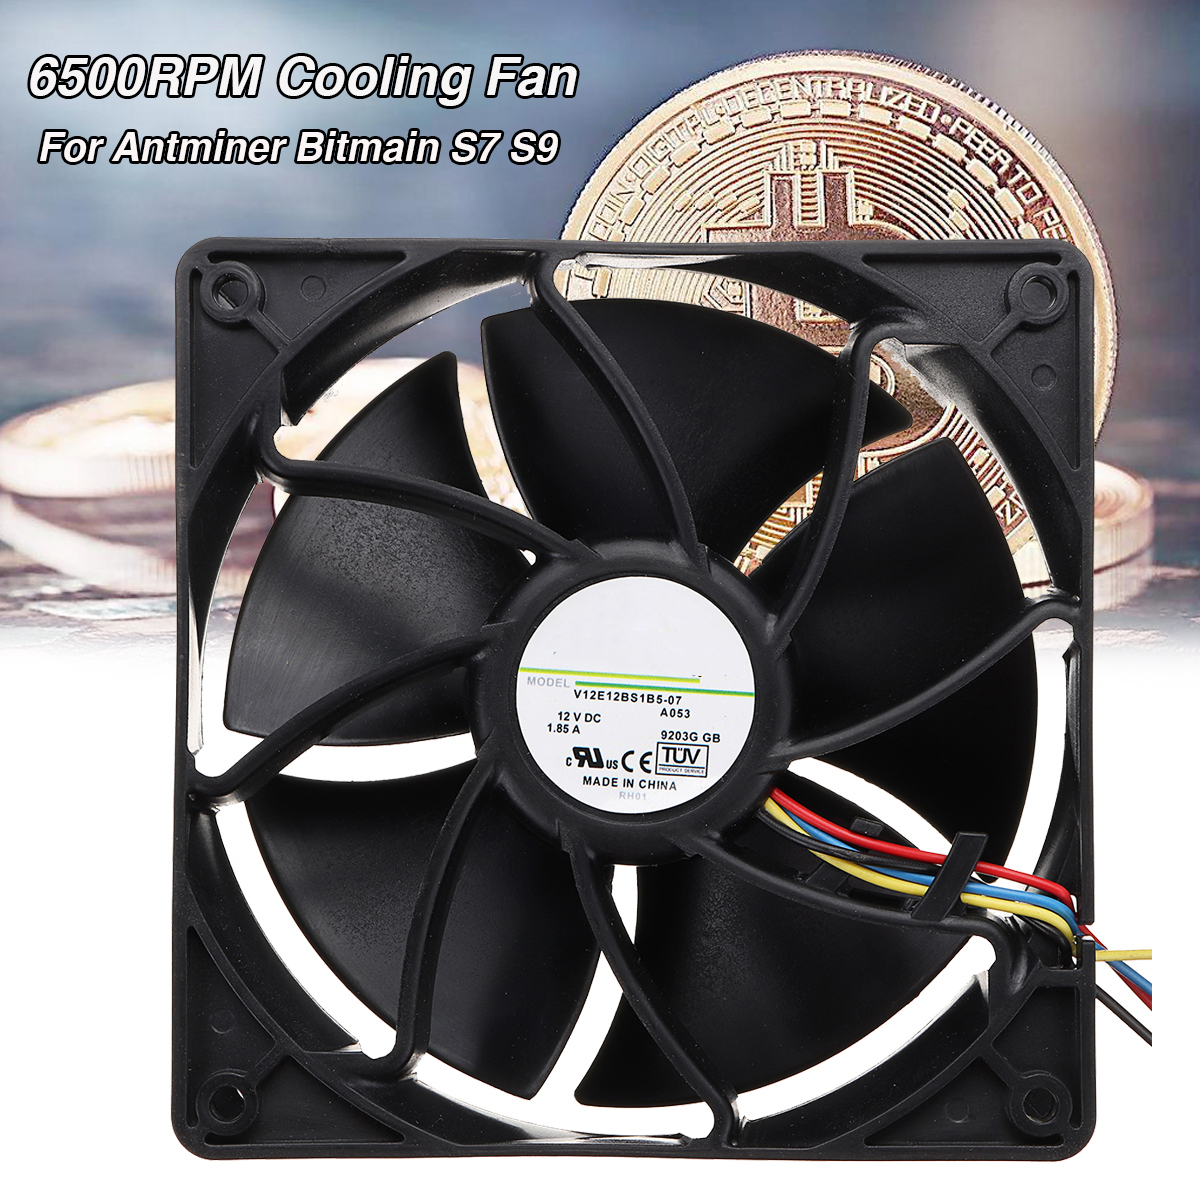 6500RPM-Cooling-Fan-Vovomay-Replacement-4-pin-Connector-for-Antminer-Bitmain-S7-S9-1386324-1